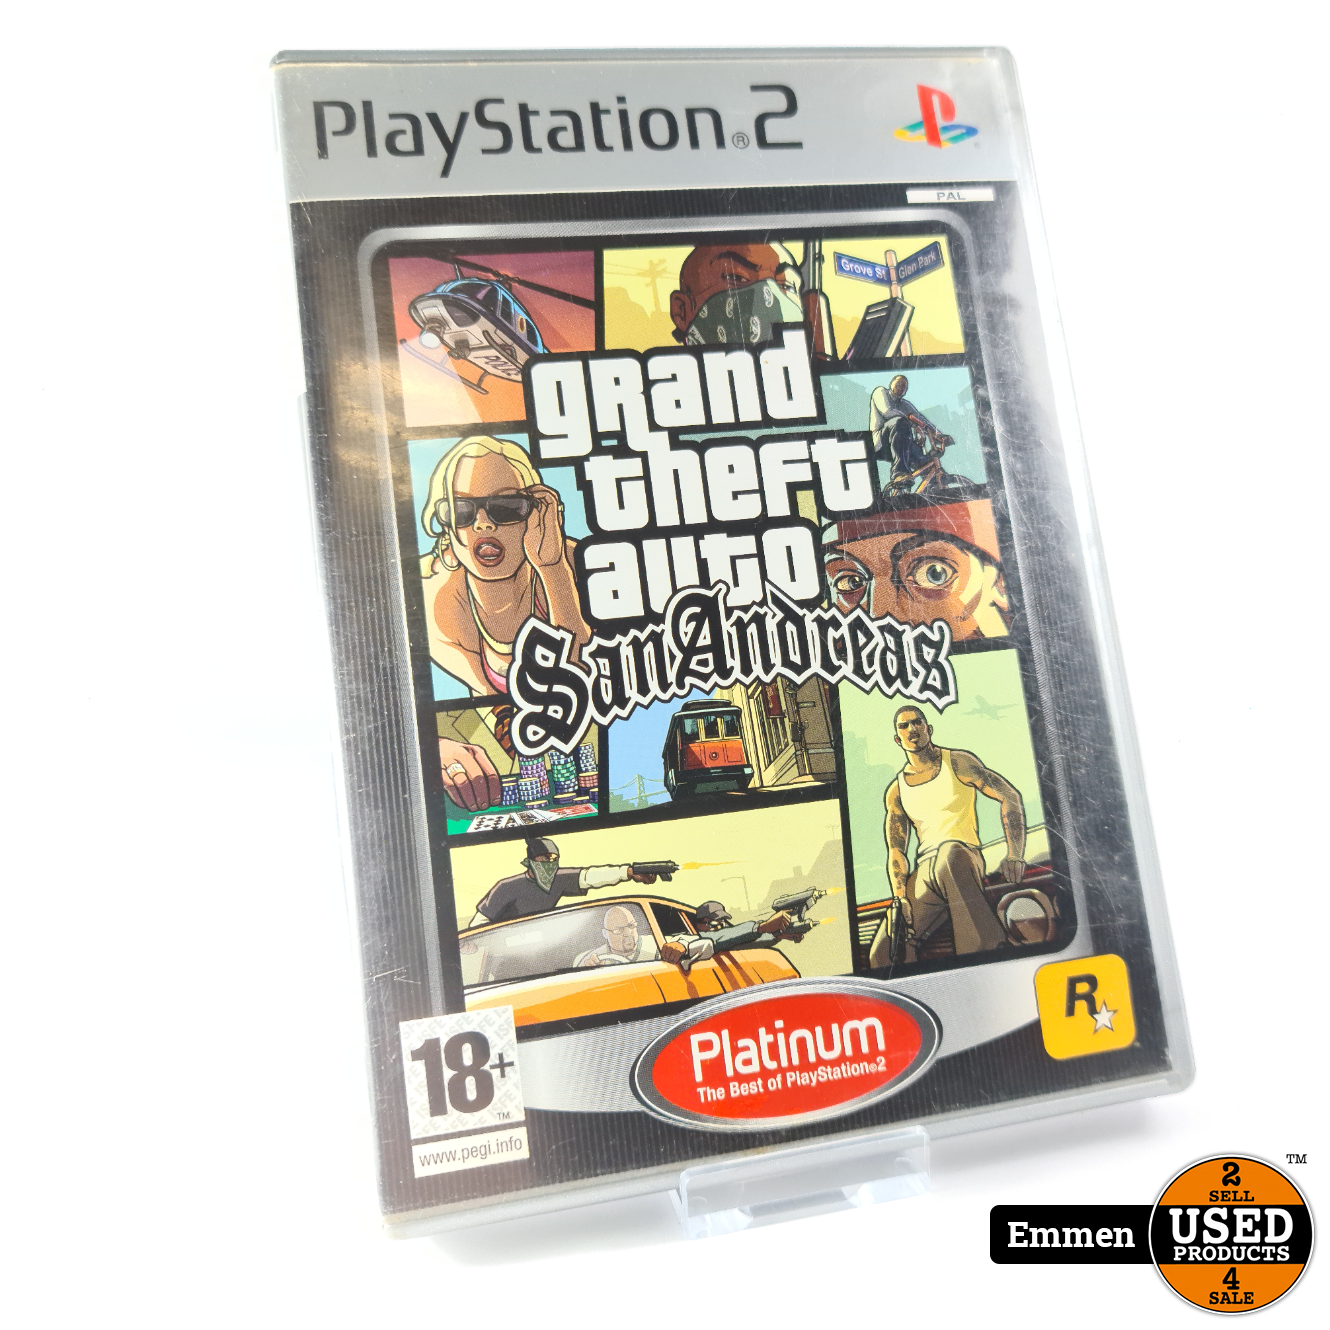 Playstation 2 Game: GTA - Used Products Emmen